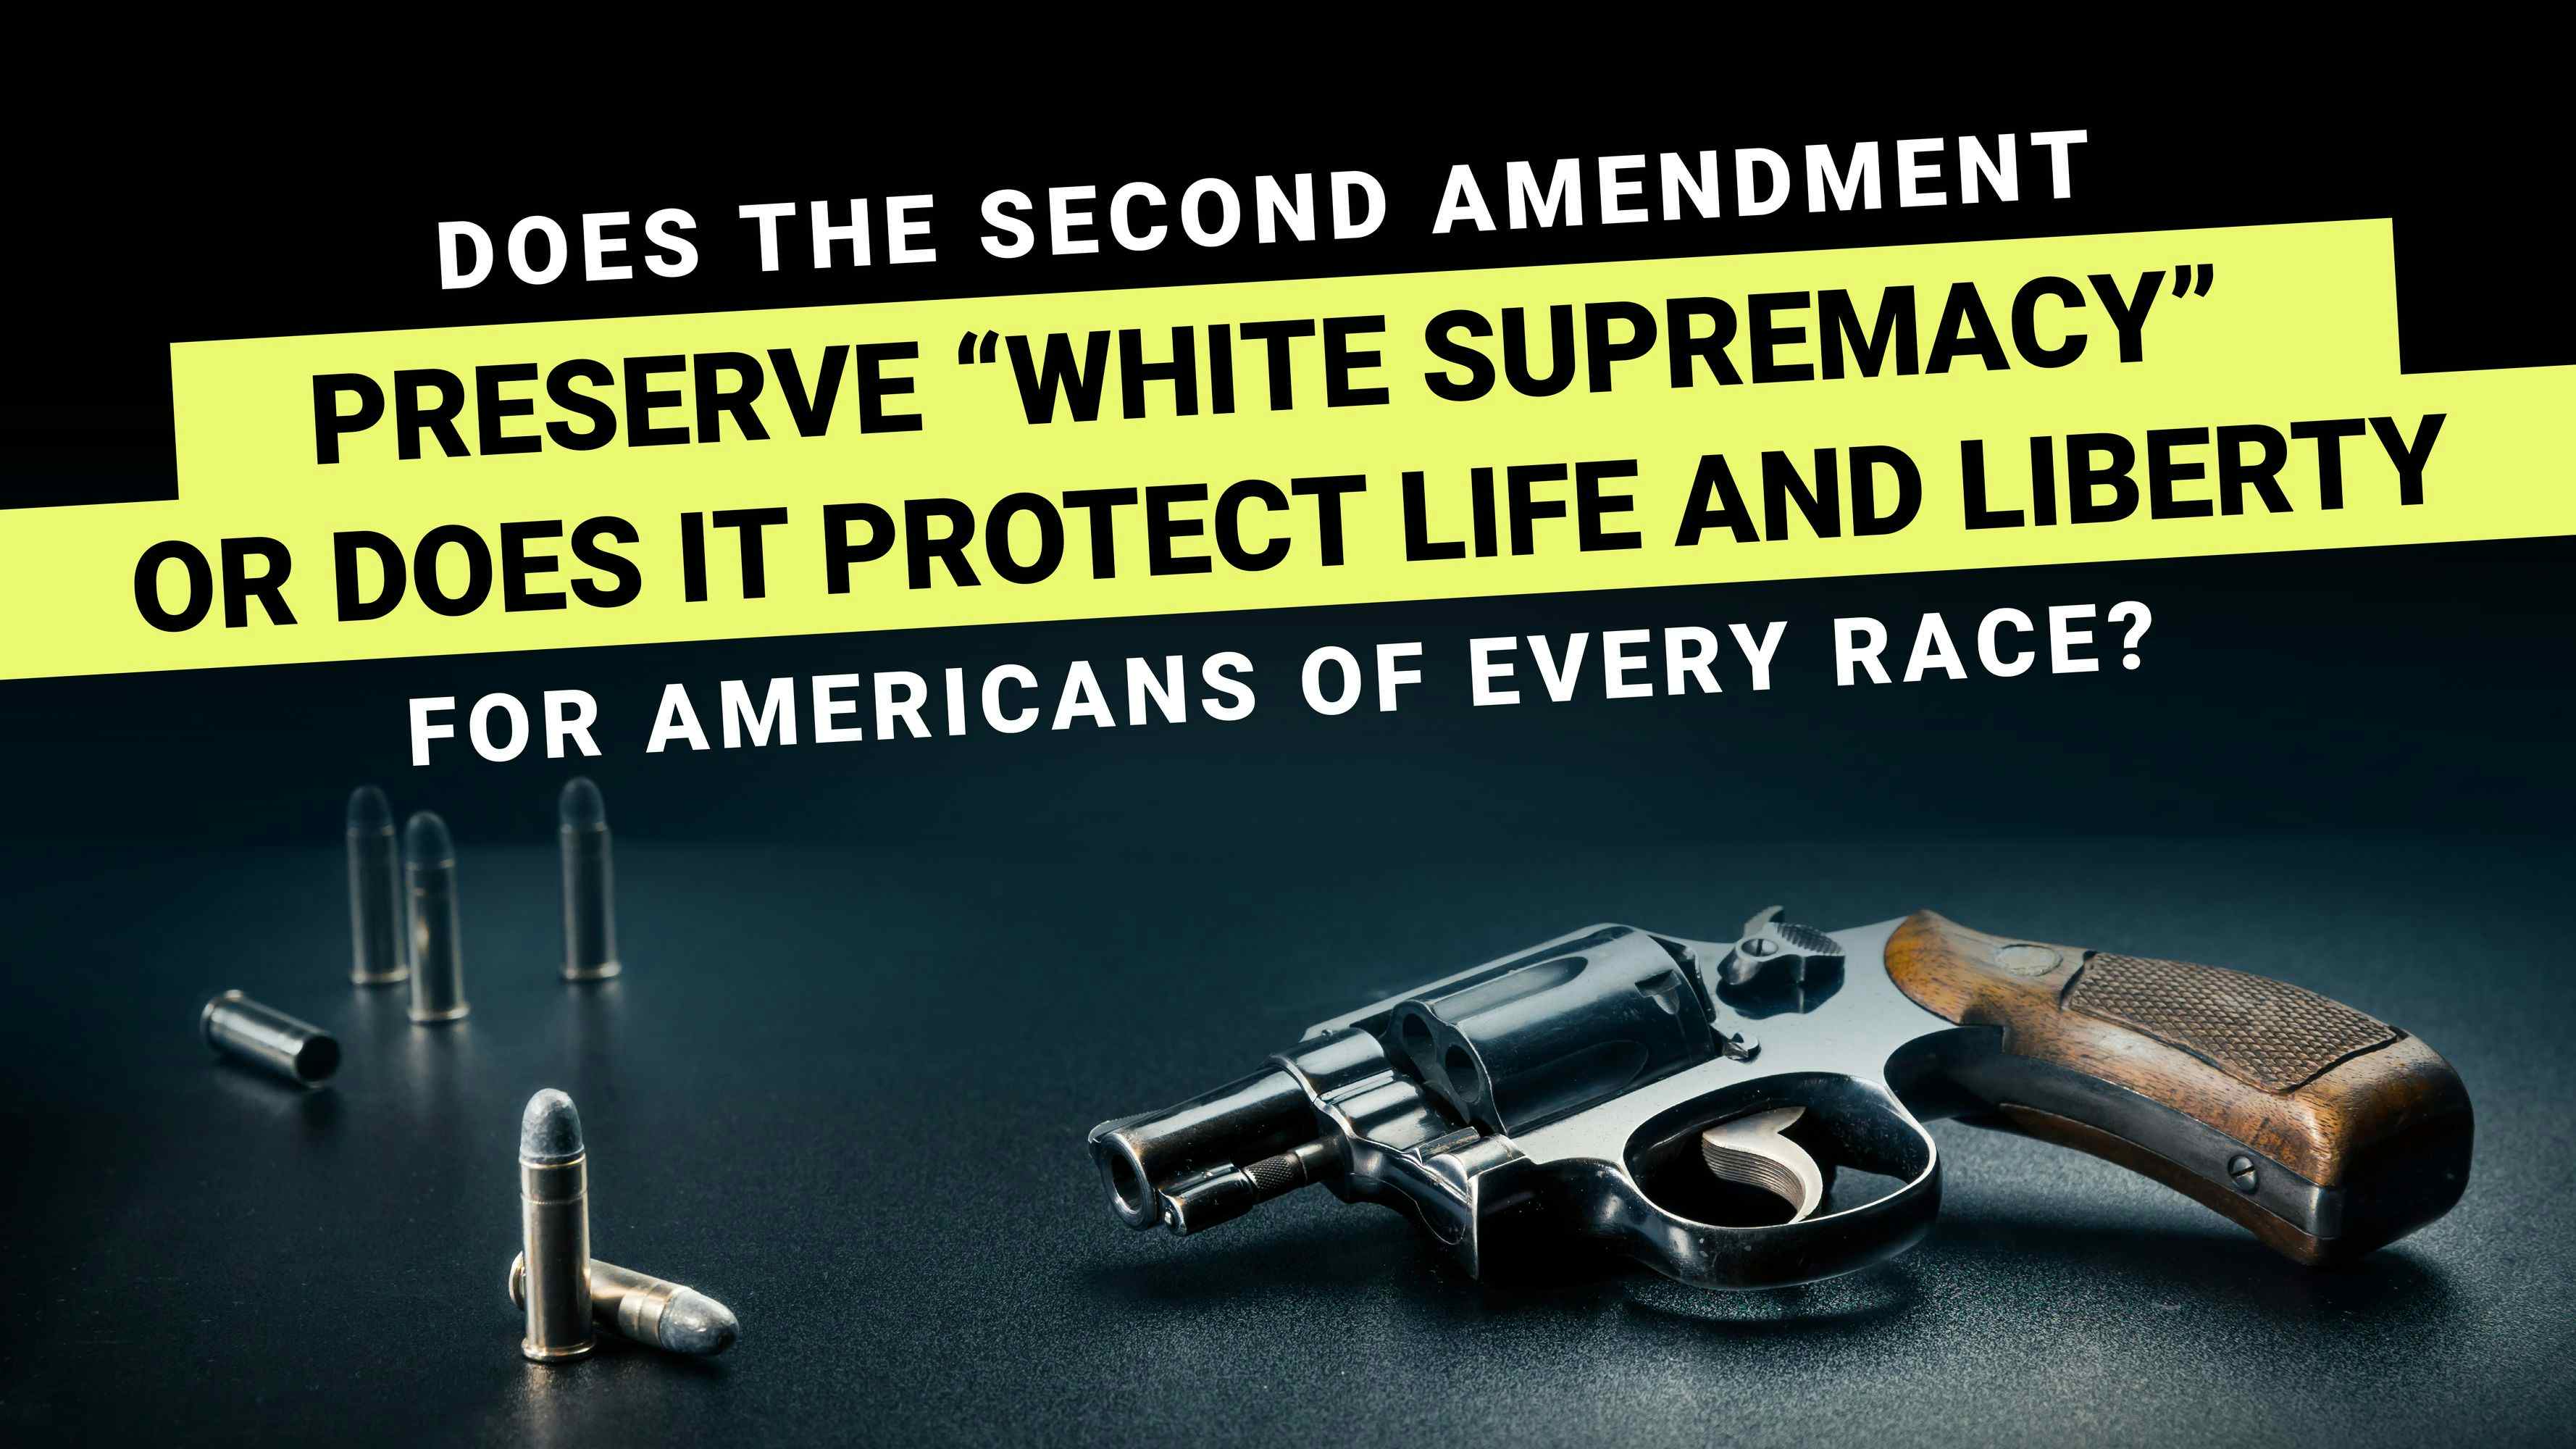 Does the Second Amendment Preserve "White Supremacy" or Does It Protect Life and Liberty?